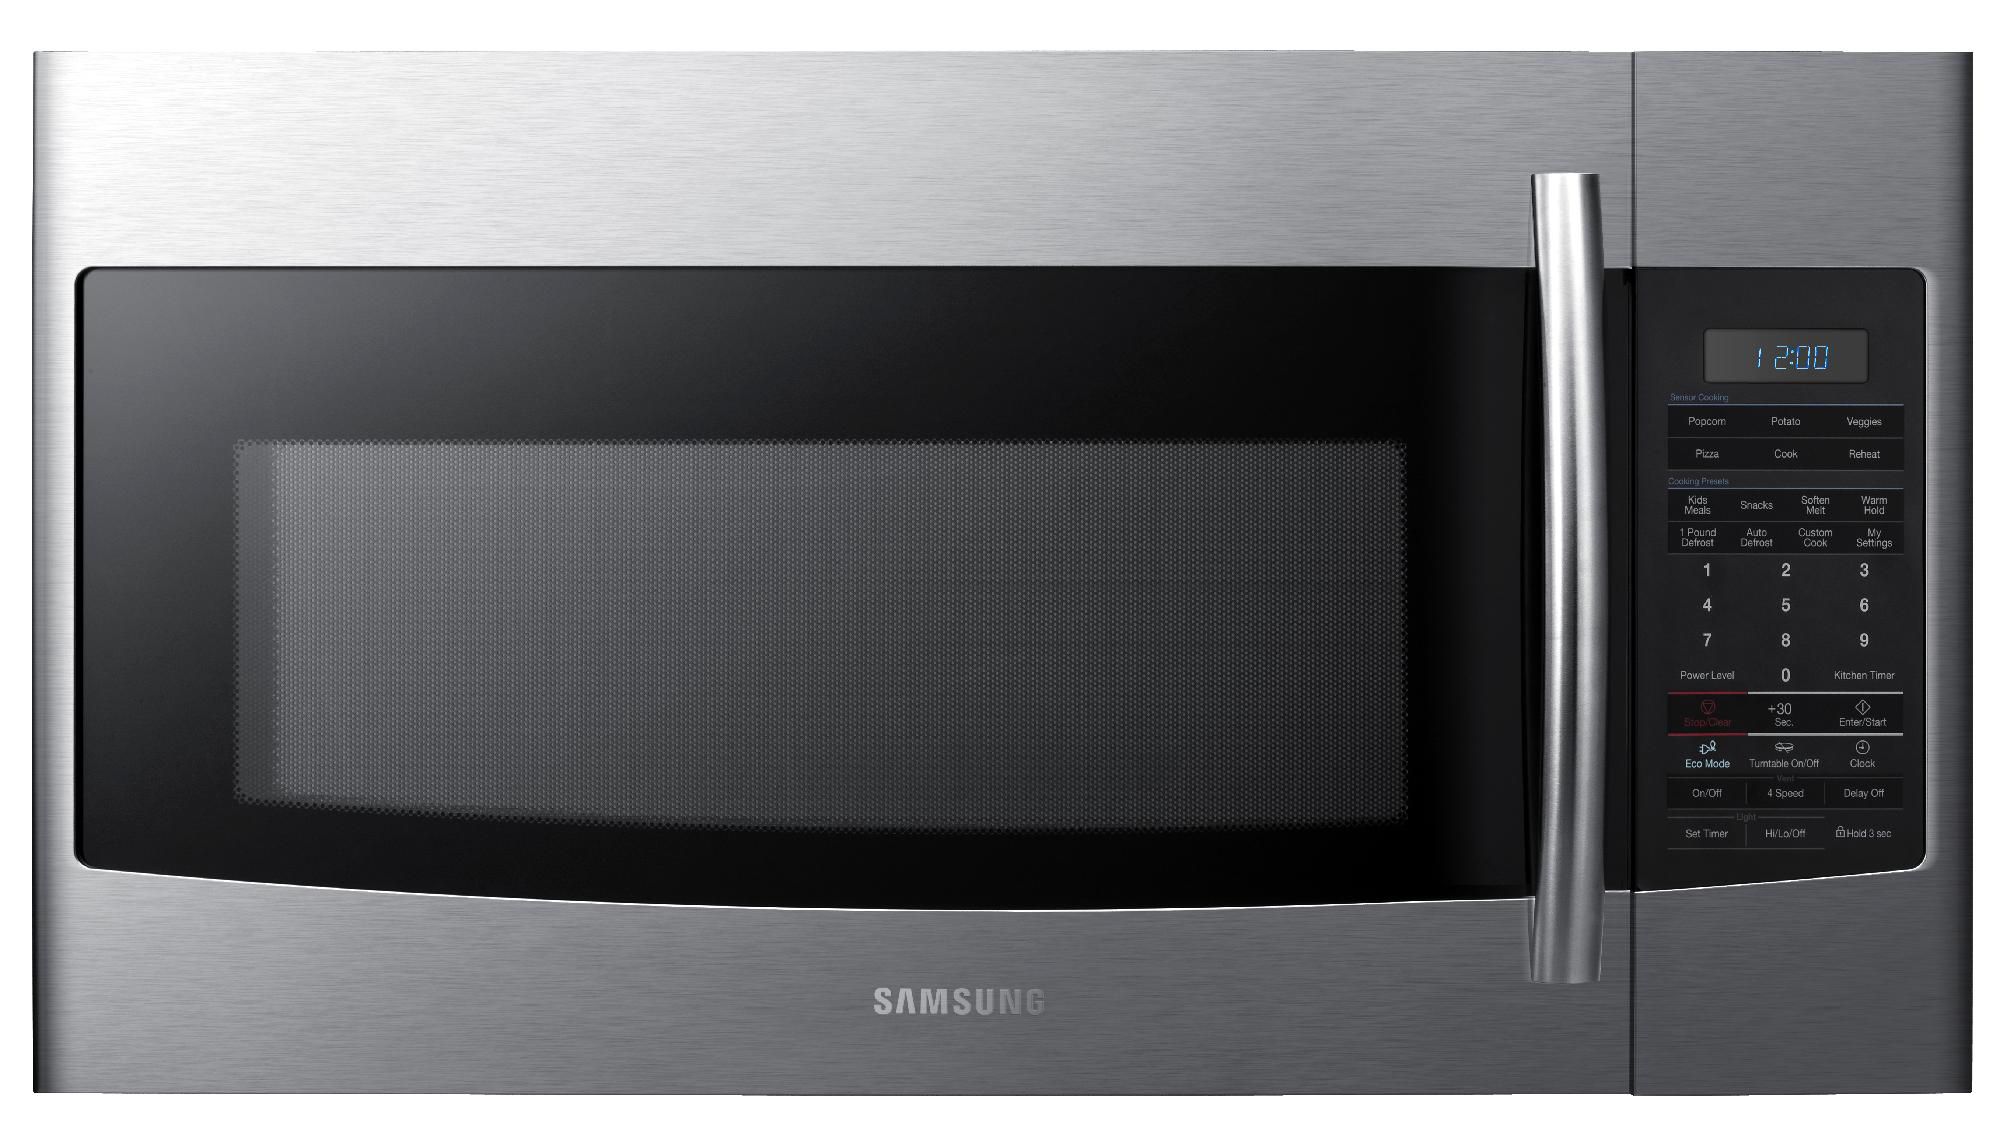 Samsung SMH1816S 30" Over the Range Microwave - Stainless Steel